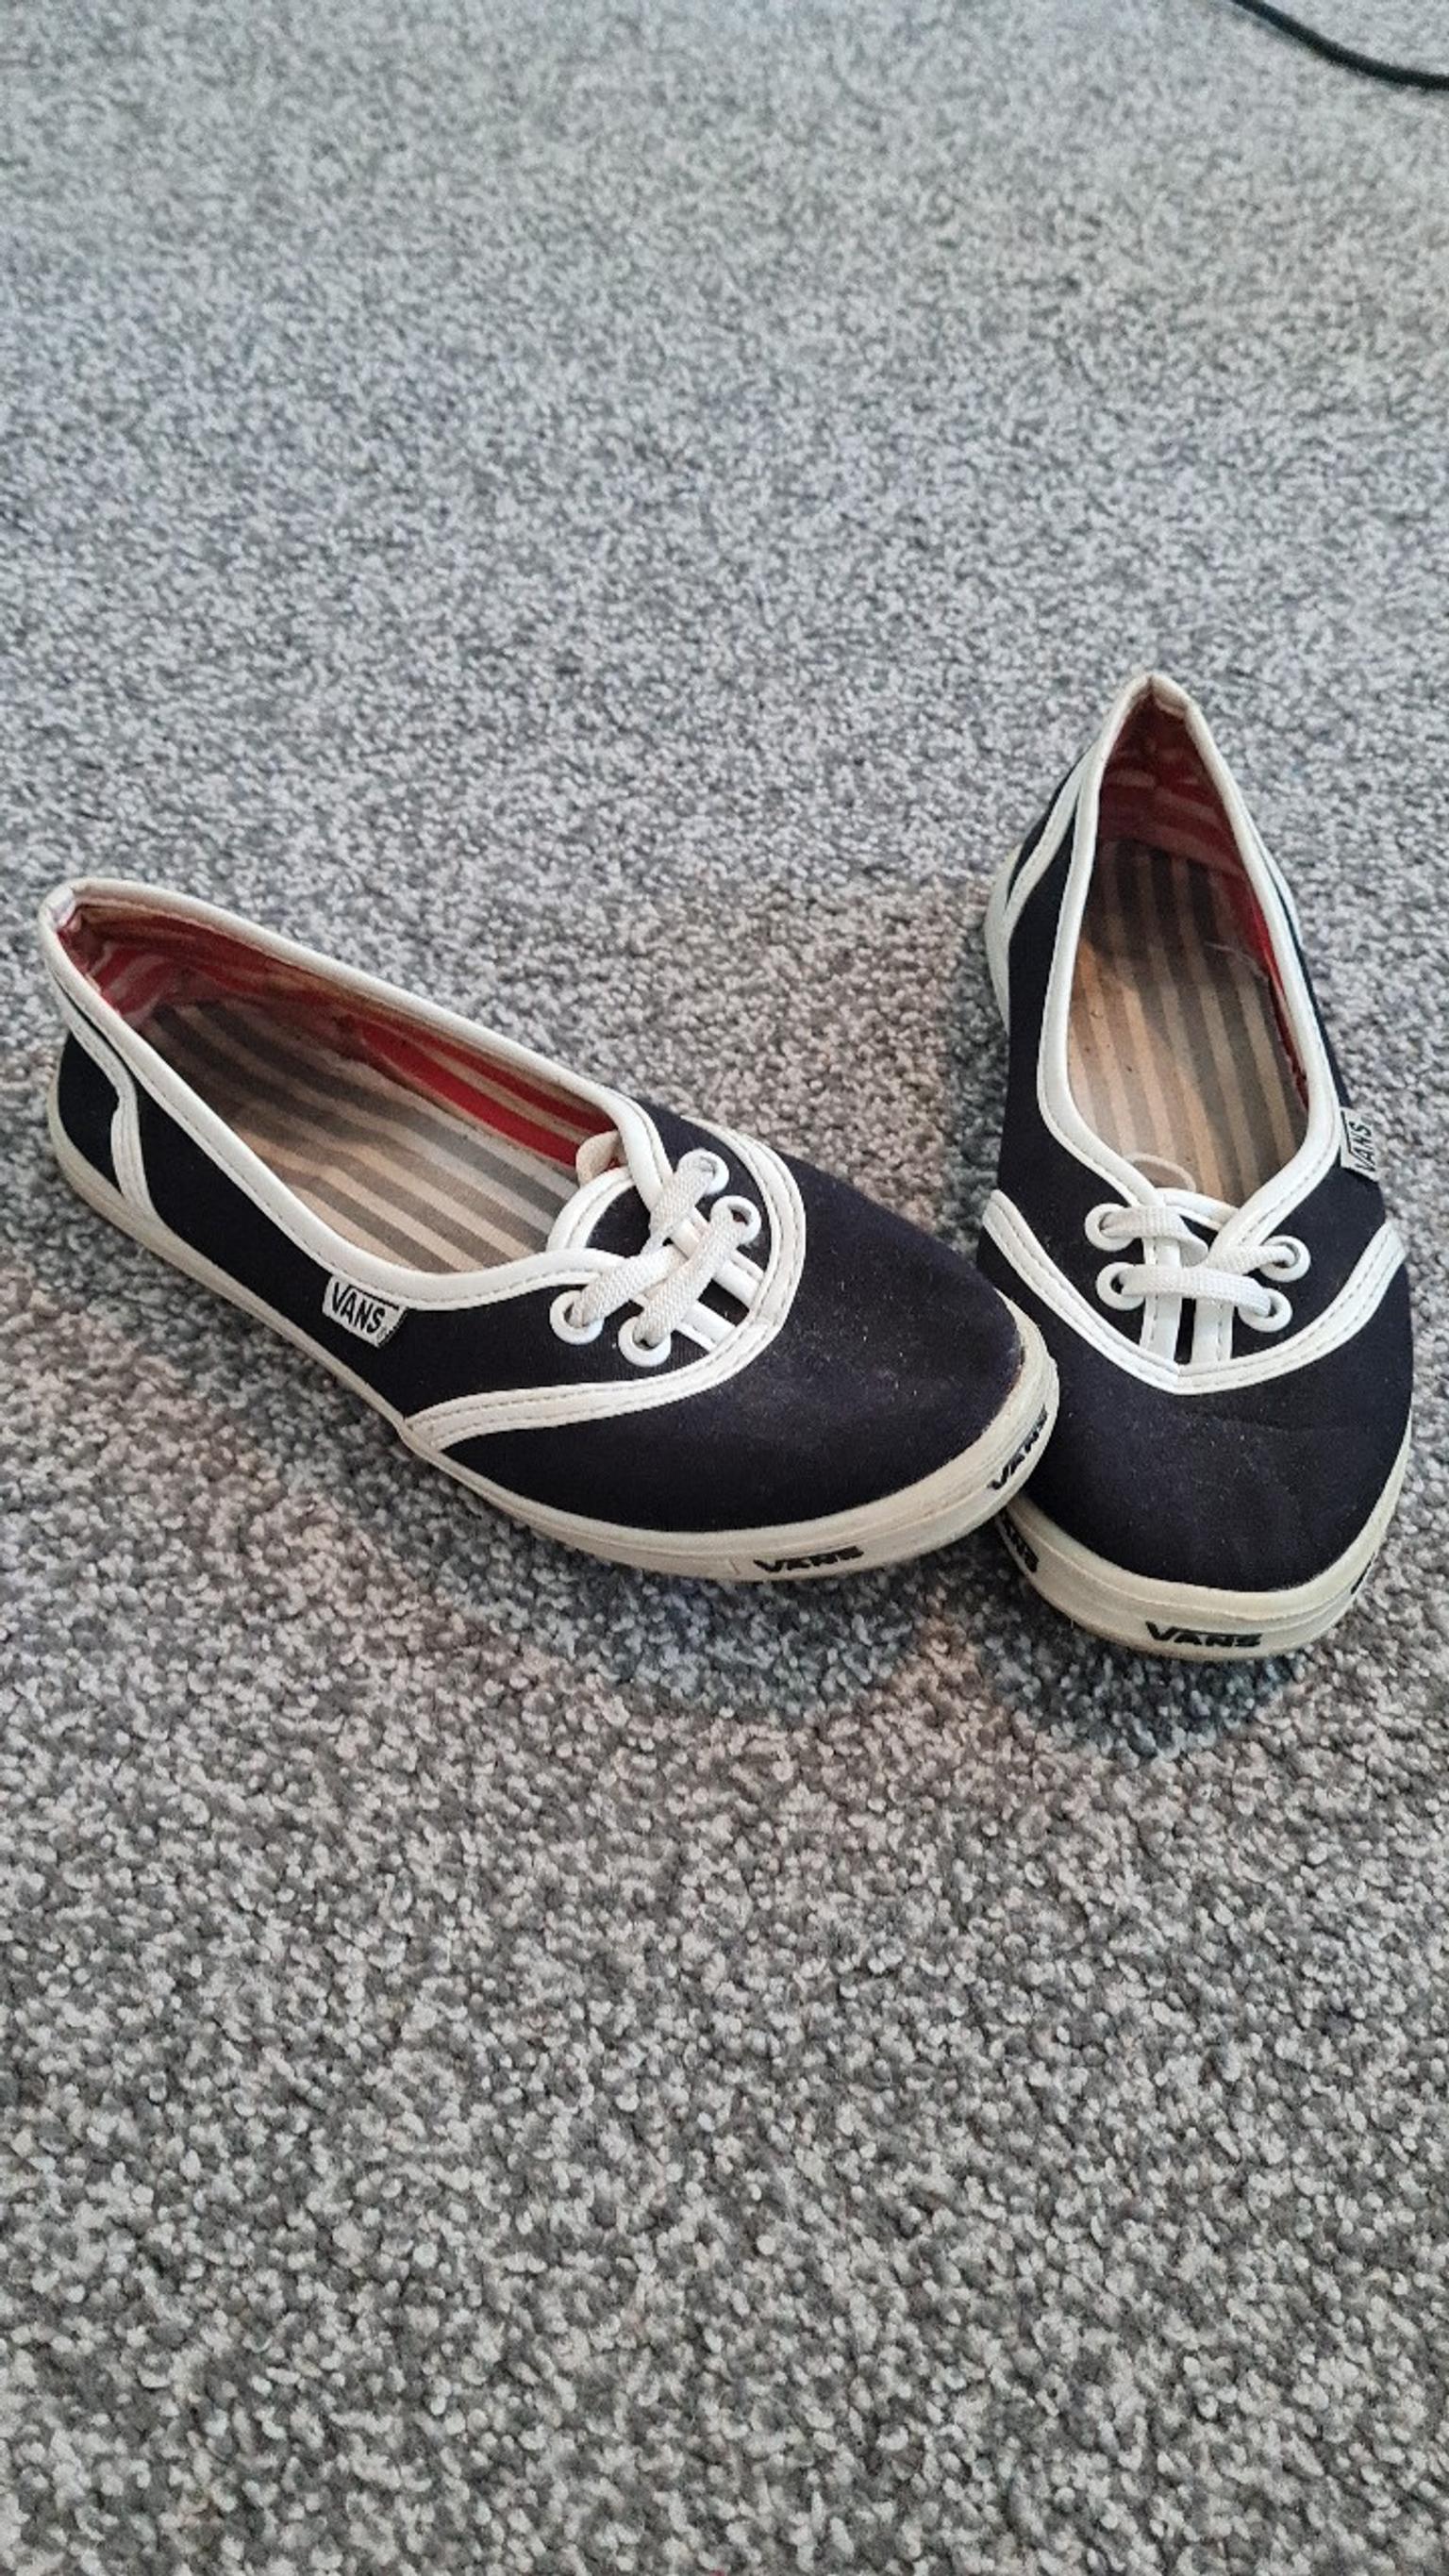 authentic vans dolly shoes in SE19 